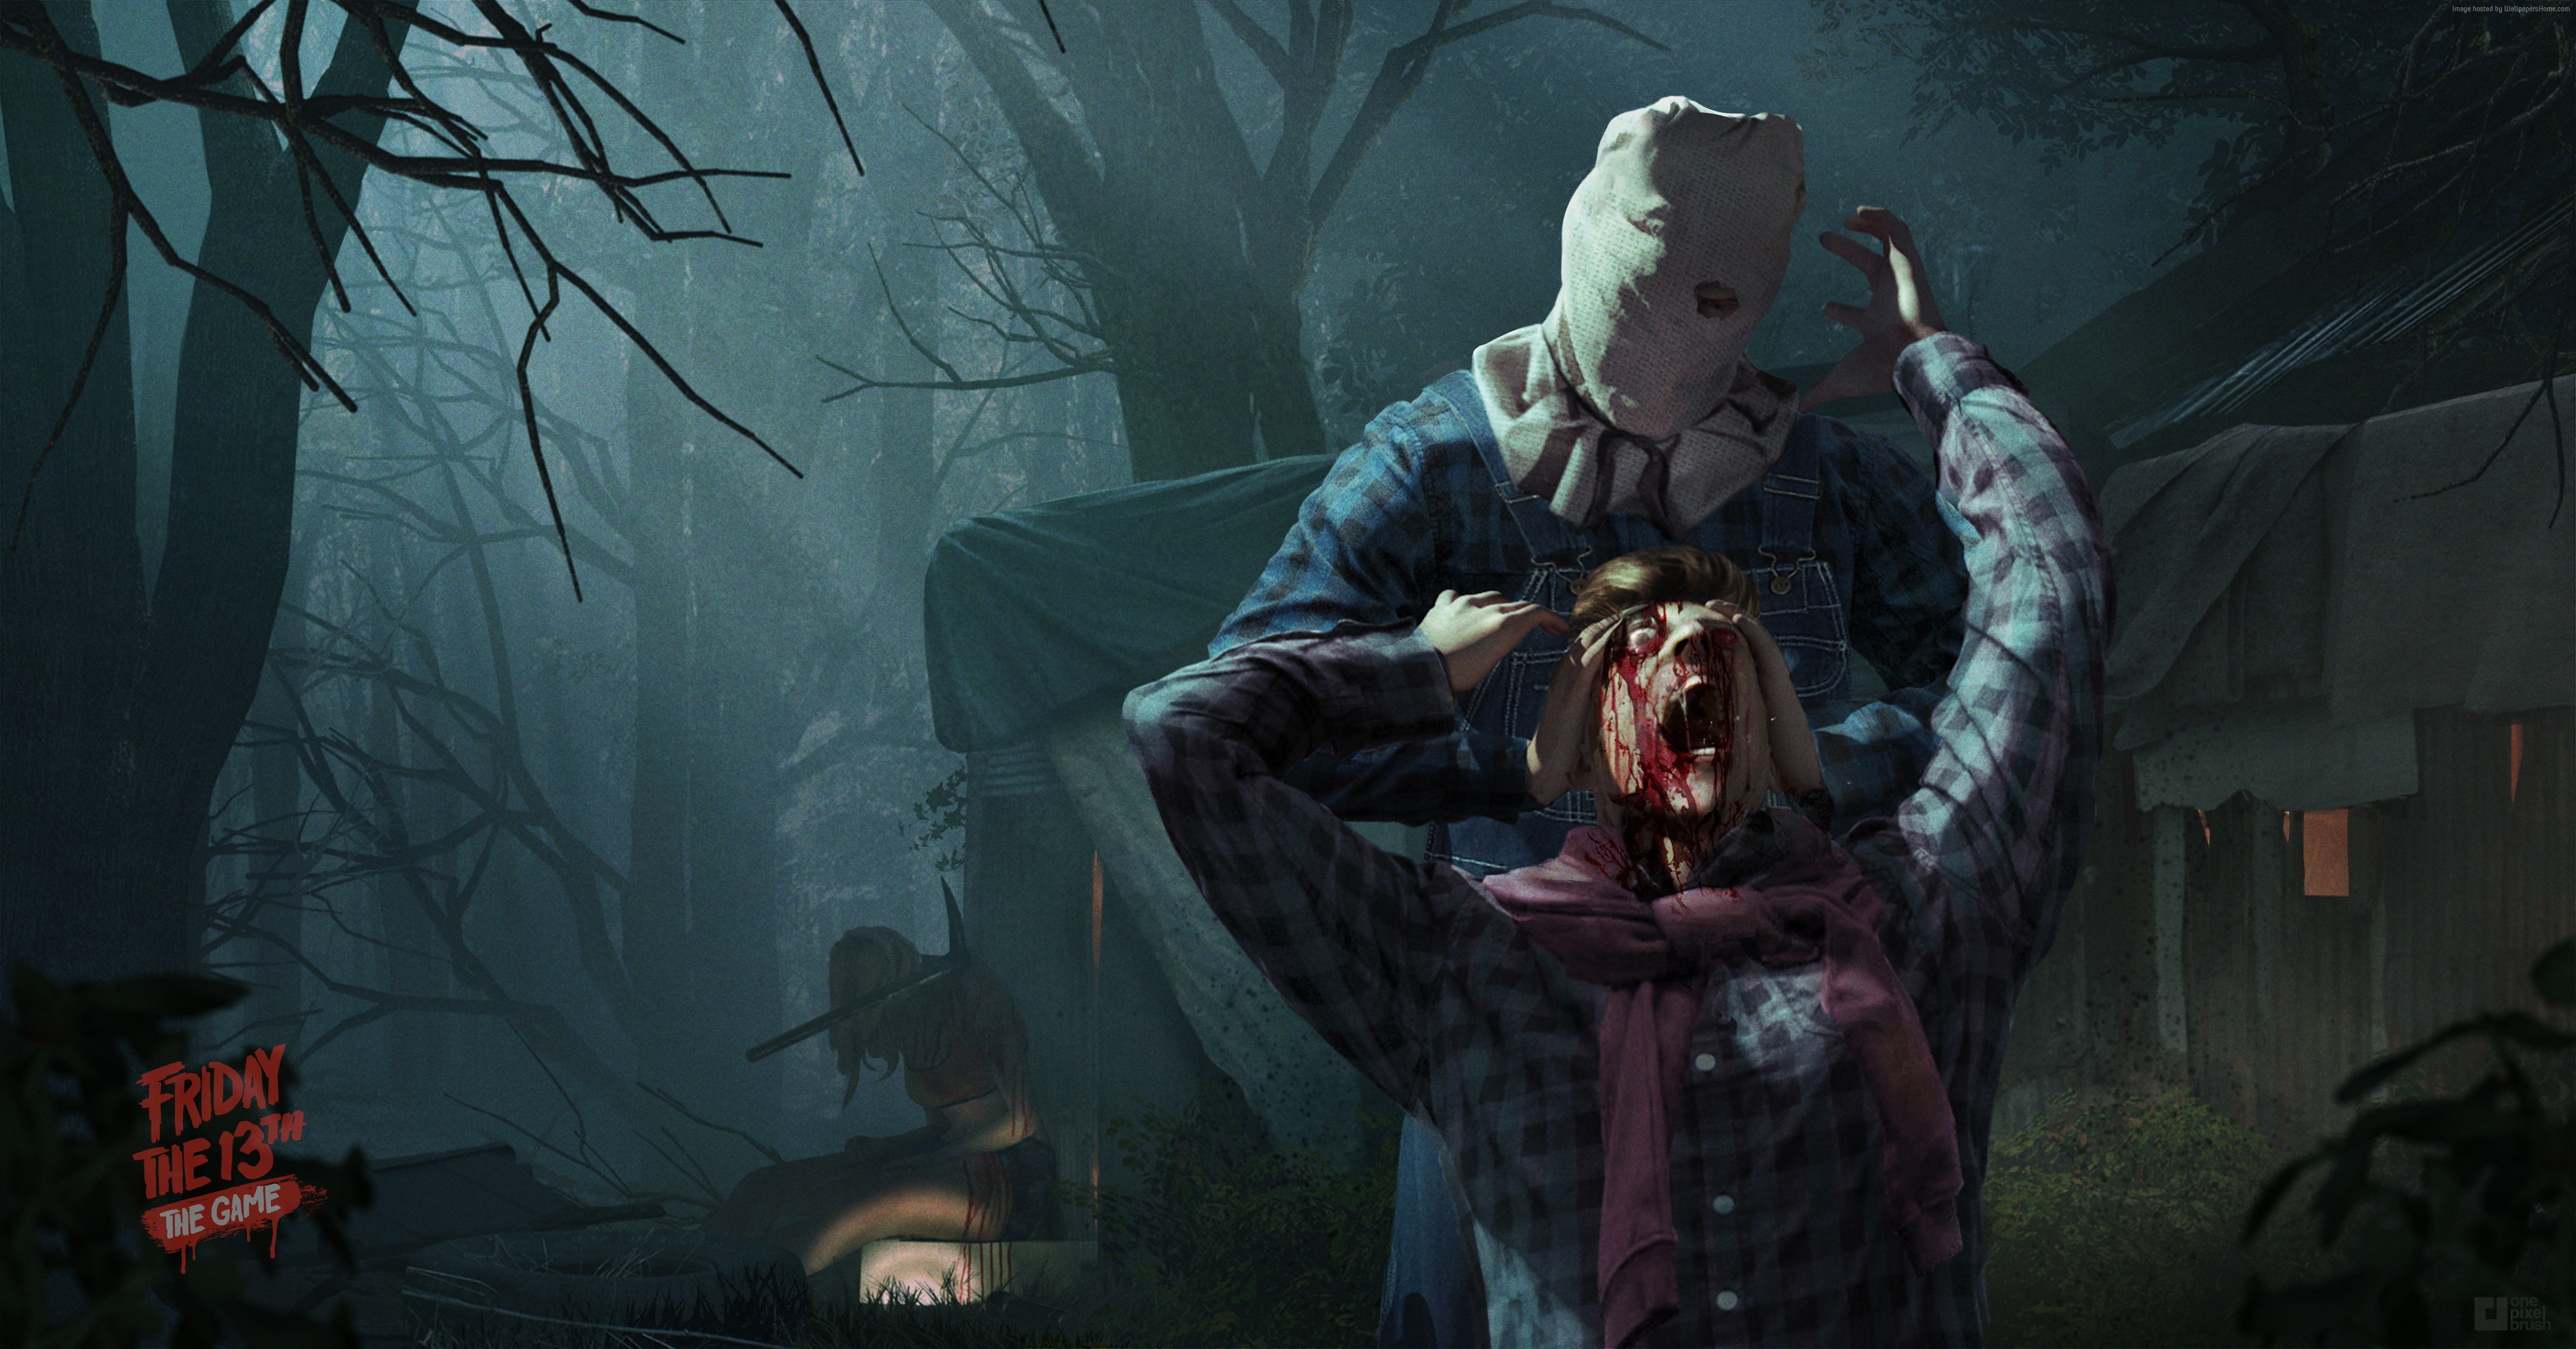 Video Game Friday the 13th: The Game HD Wallpaper | Background Image